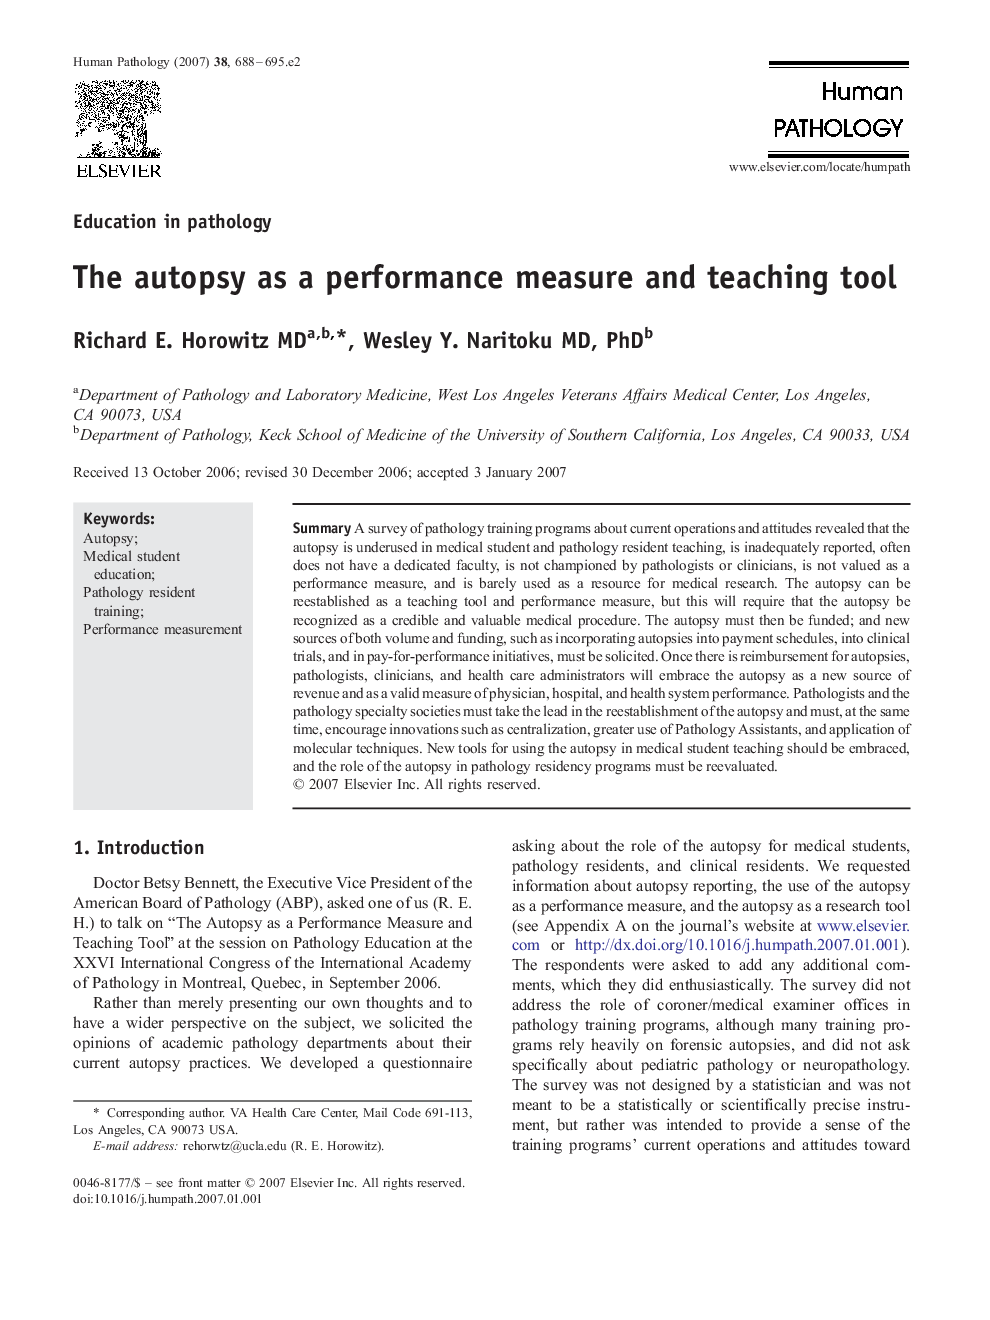 The autopsy as a performance measure and teaching tool